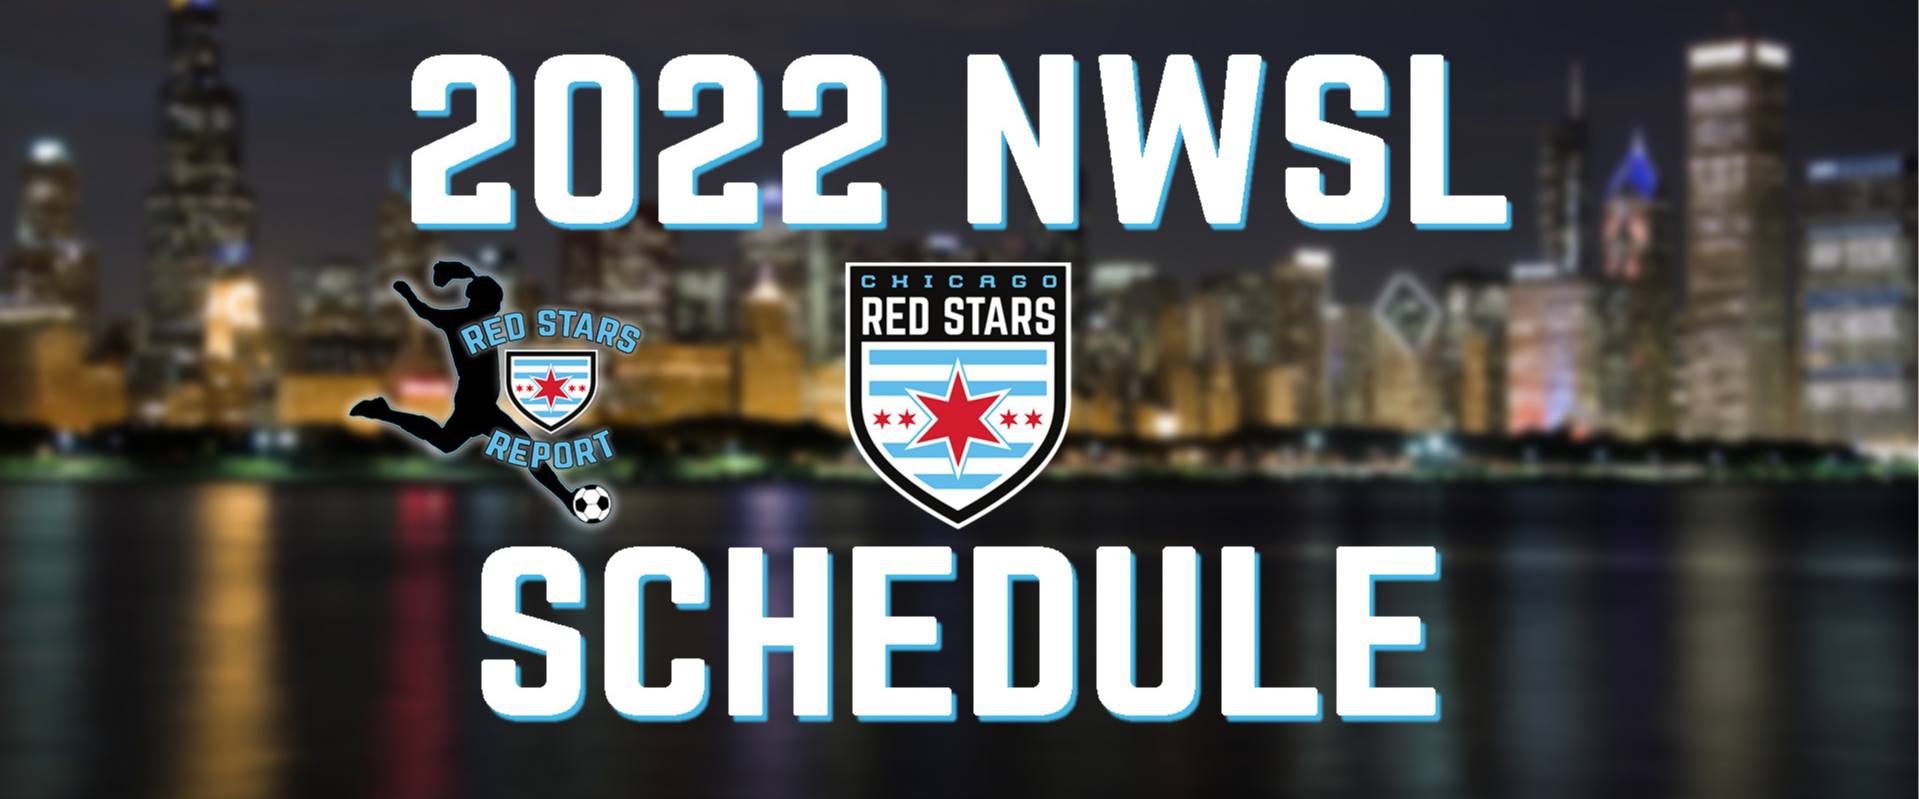 The 2022 Chicago Red Stars Schedule Has Arrived!